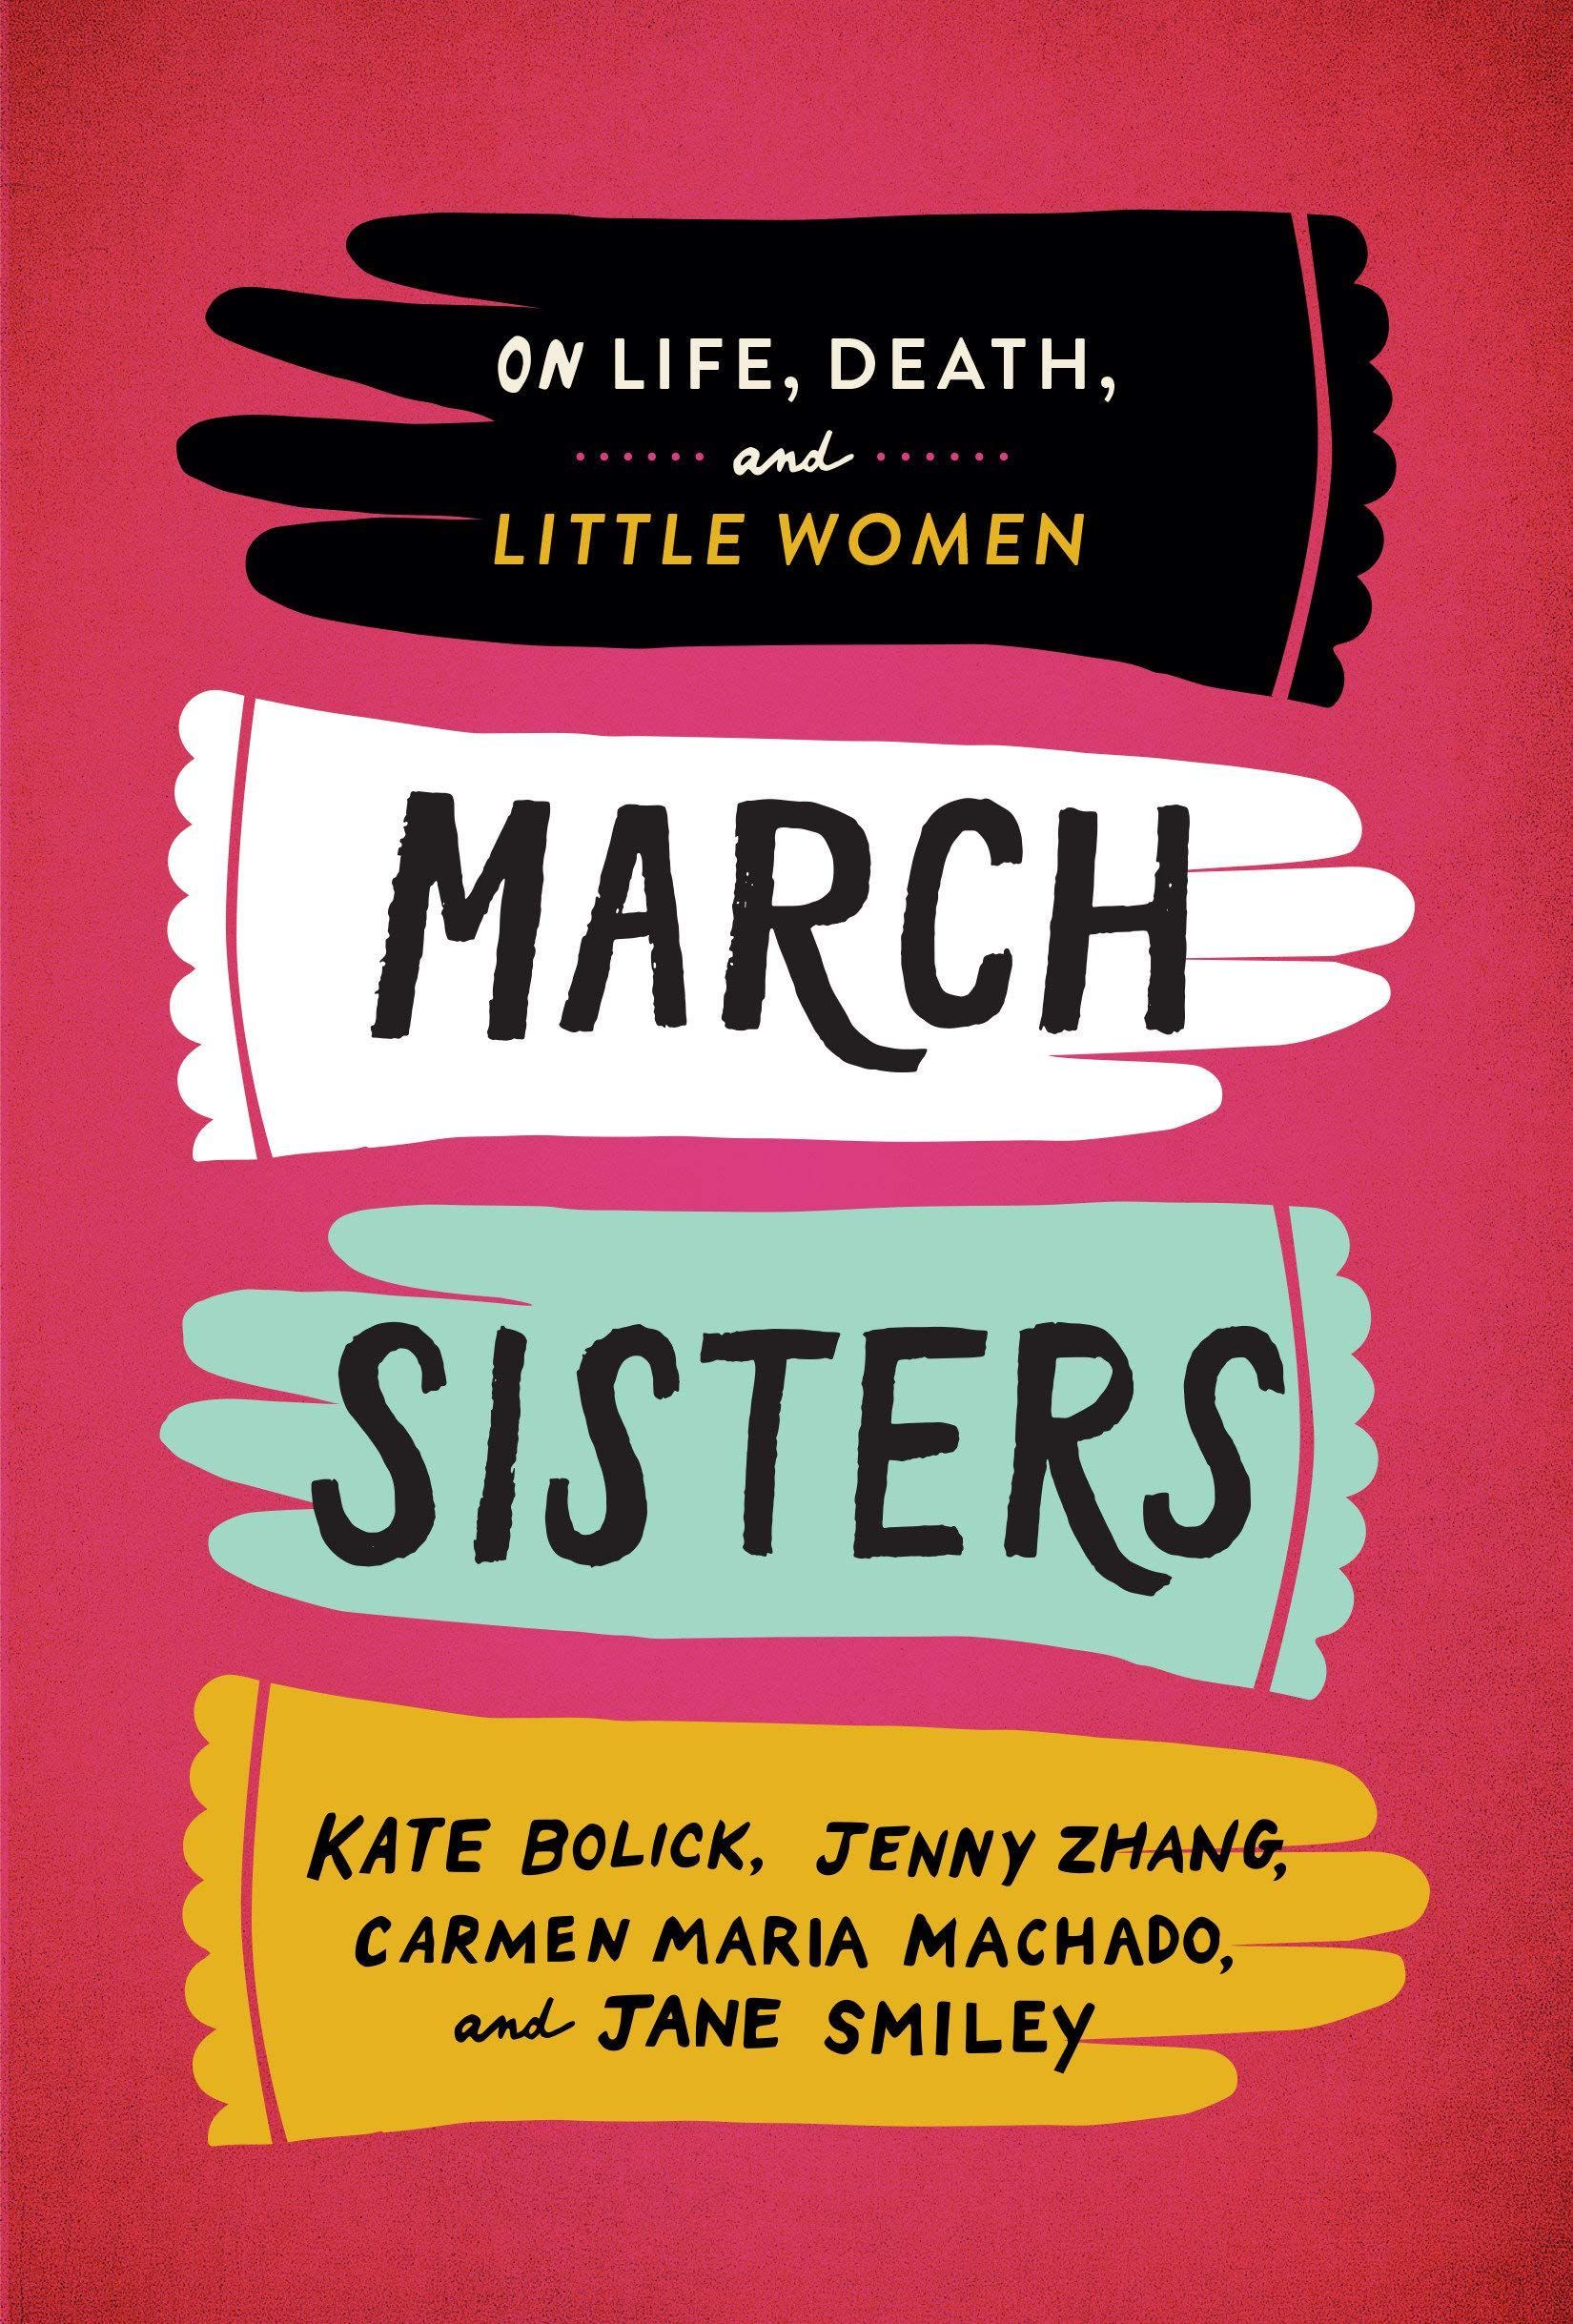 The Emancipation of Little Women: On Library of America’s “March Sisters”